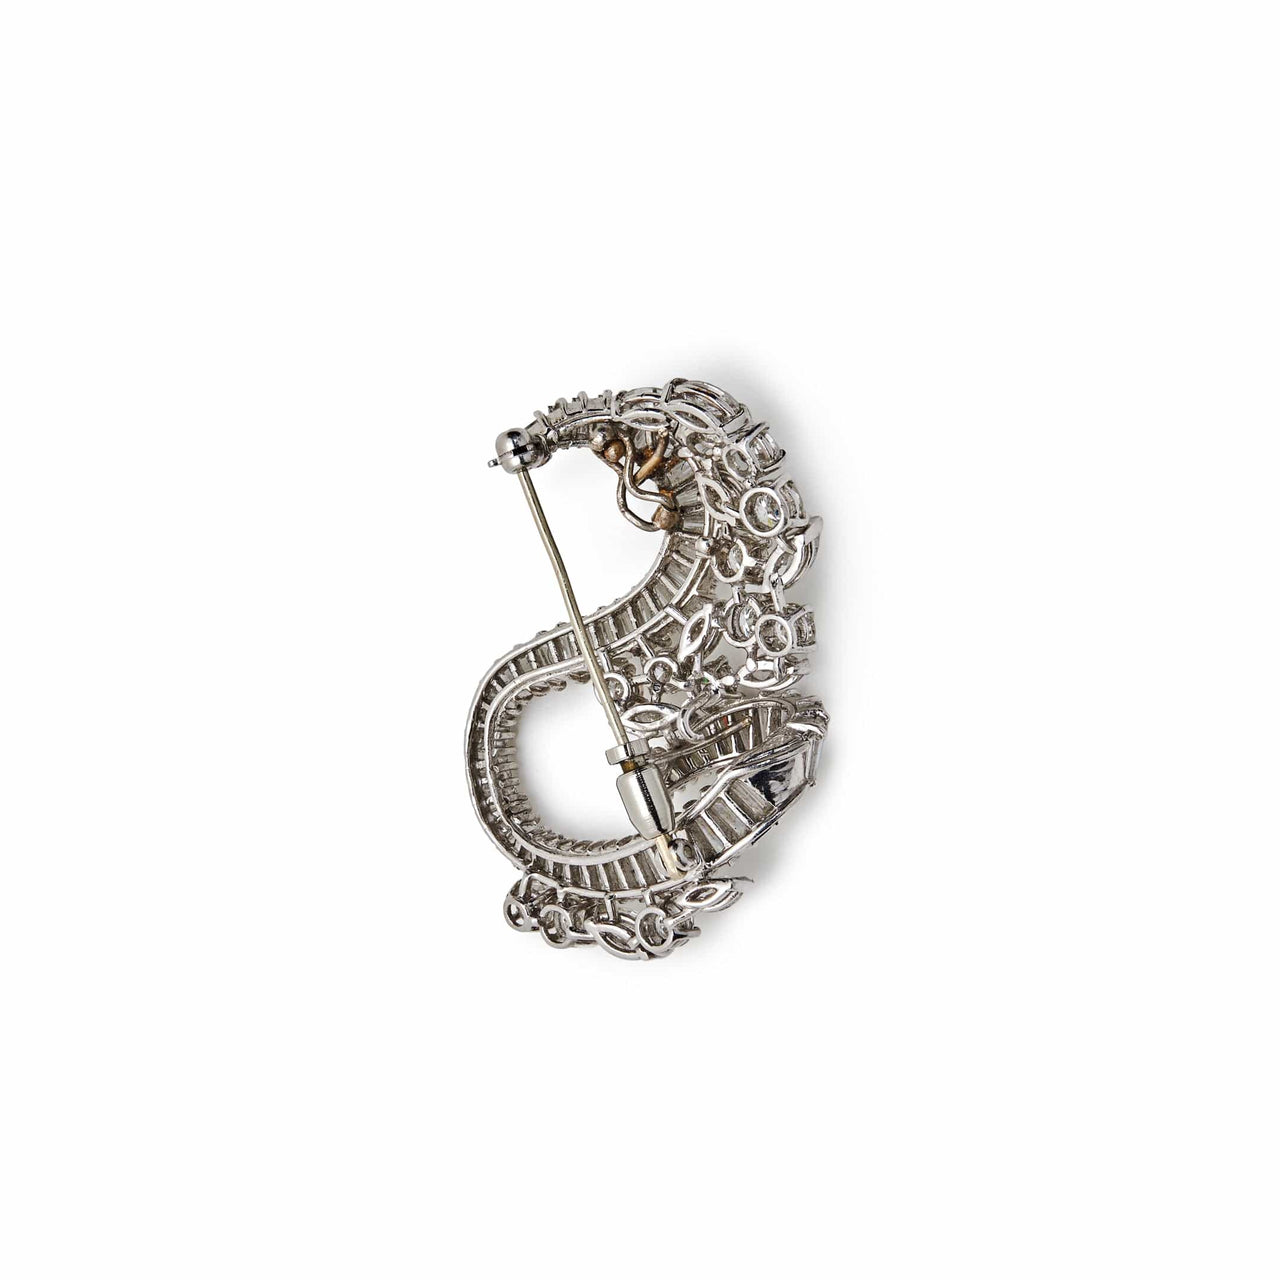 Vintage Brooch18-Karat White Gold  Round Diamonds, Marquise-Shaped Diamonds, and Tapered Baguette-Cut Diamonds